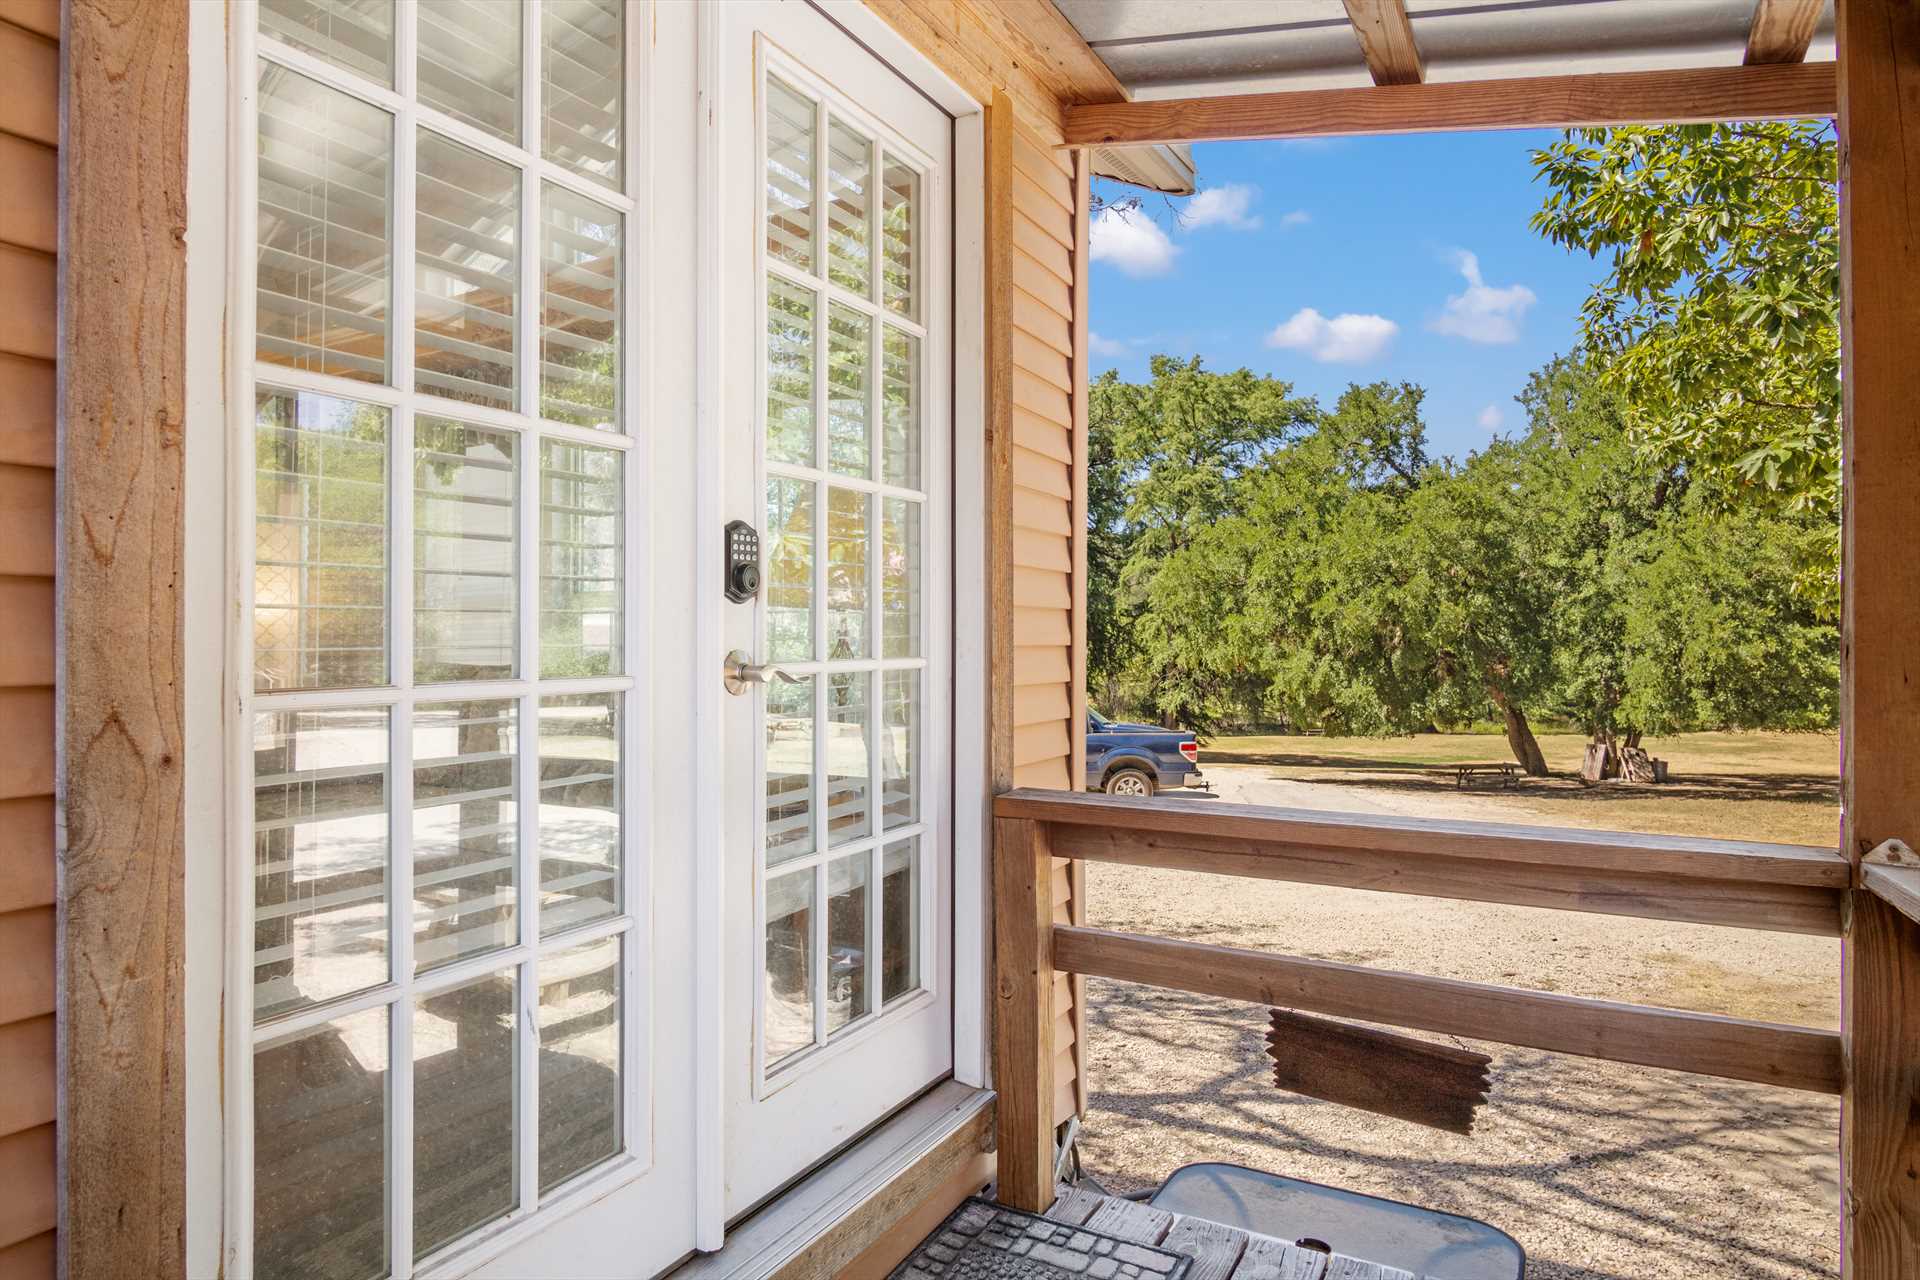                                                 One of the many highlights of the Park Model Cabin is its many windows that let in lots of natural light and Hill Country views!